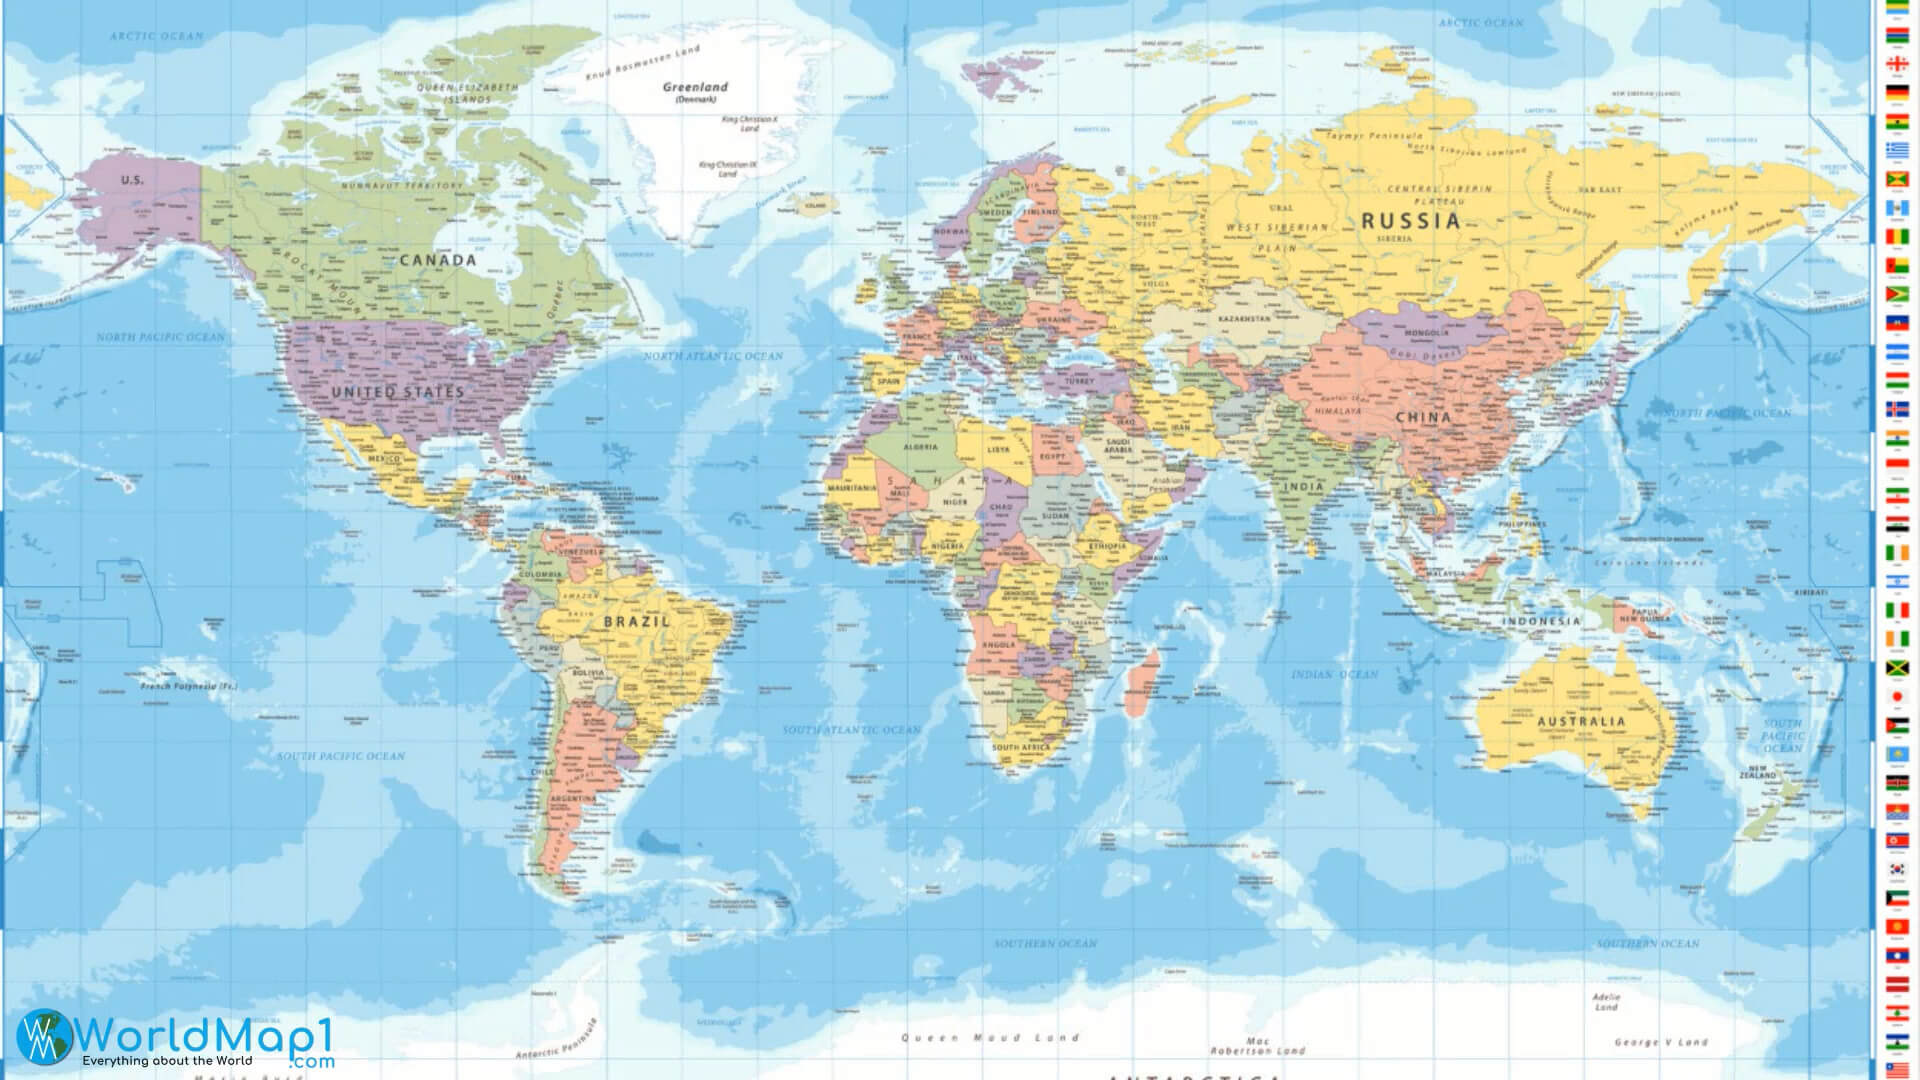 Antarctica Map on the World Map with Countries Flags